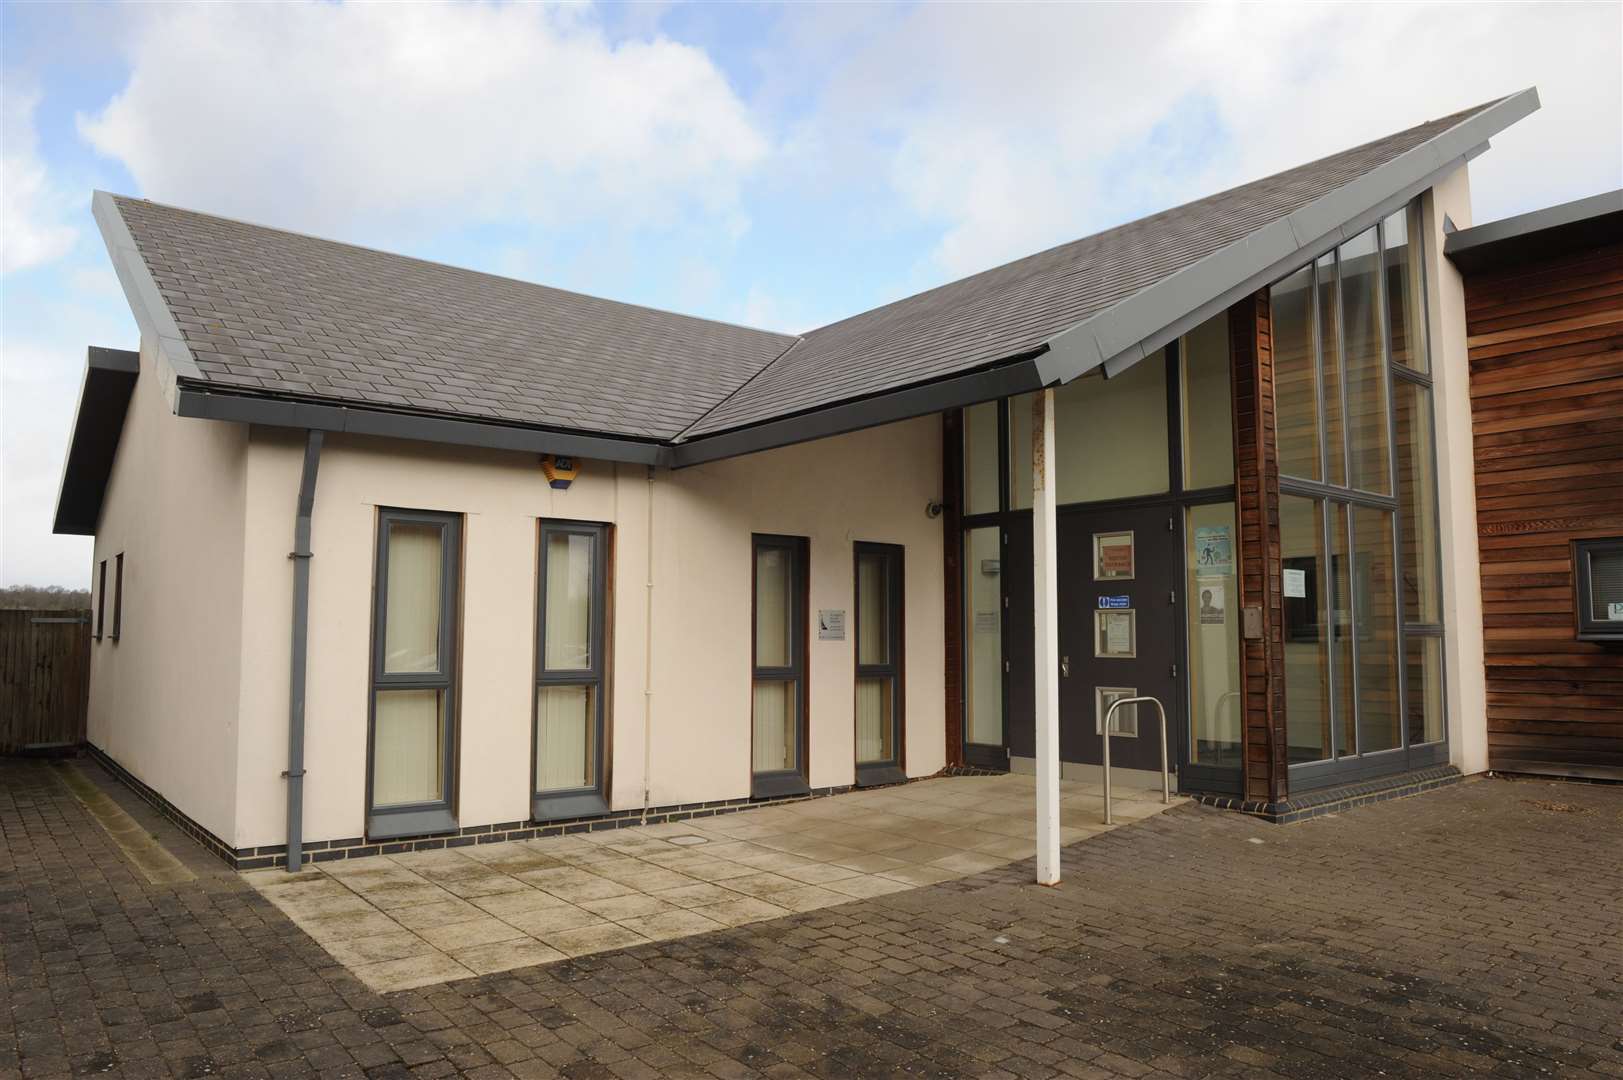 The St Mary's Island Surgery is one of five previously run by DMC